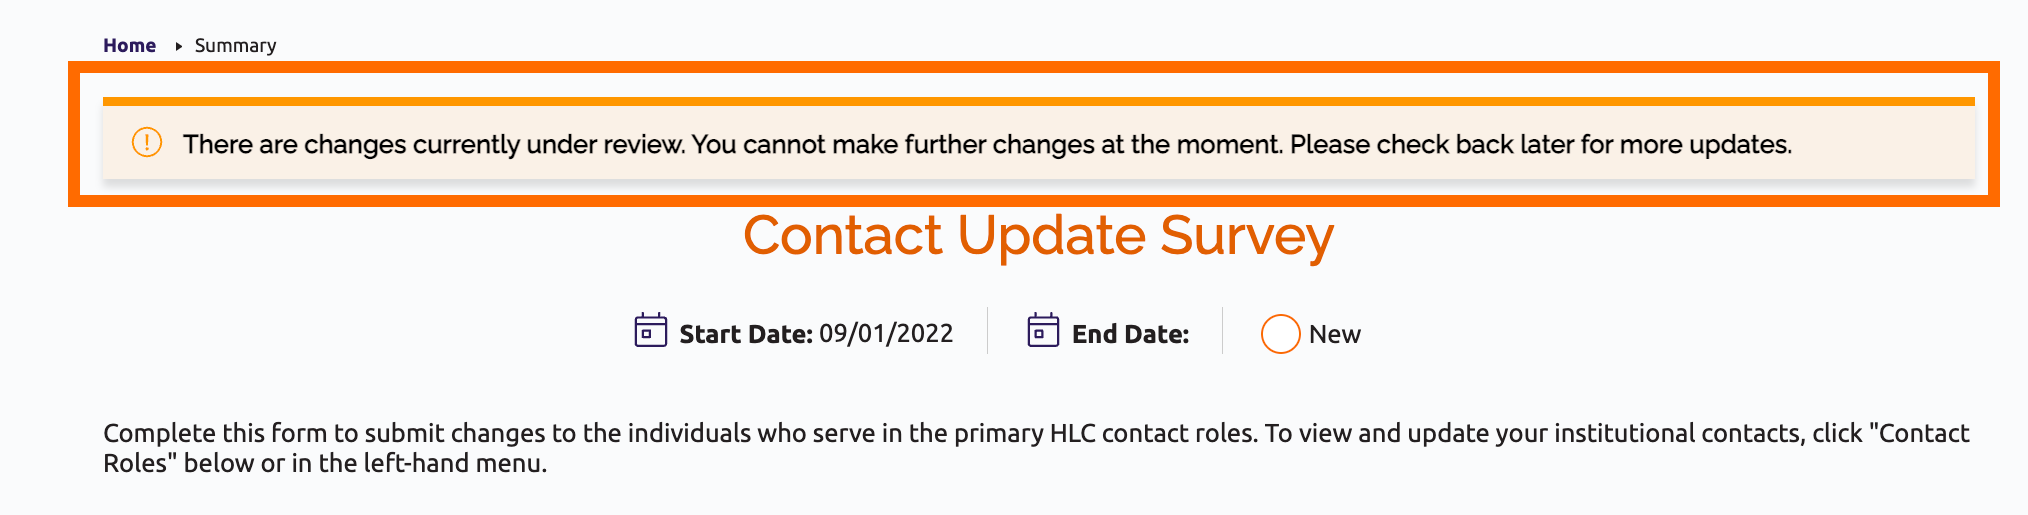 A notification box at the top of the Contact Update Survey page says "There are changes currently under review. You cannot make further changes at the moment. Please check back later for more updates."